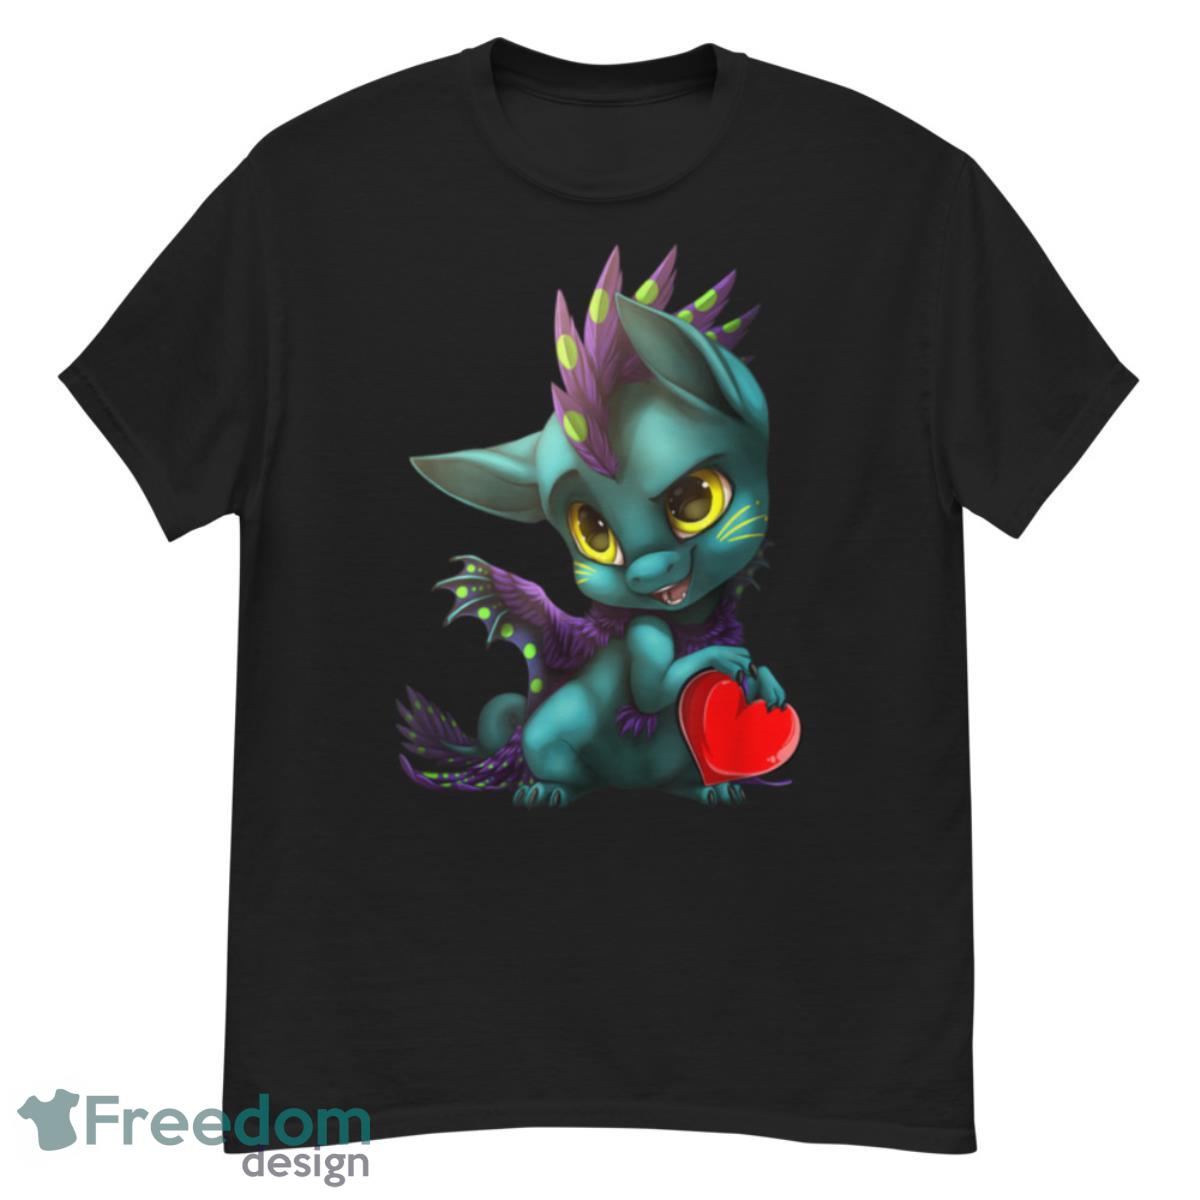 Cute Dragon Hold Red Heart Valentines Day T Shirt - G500 Men’s Classic T-Shirt